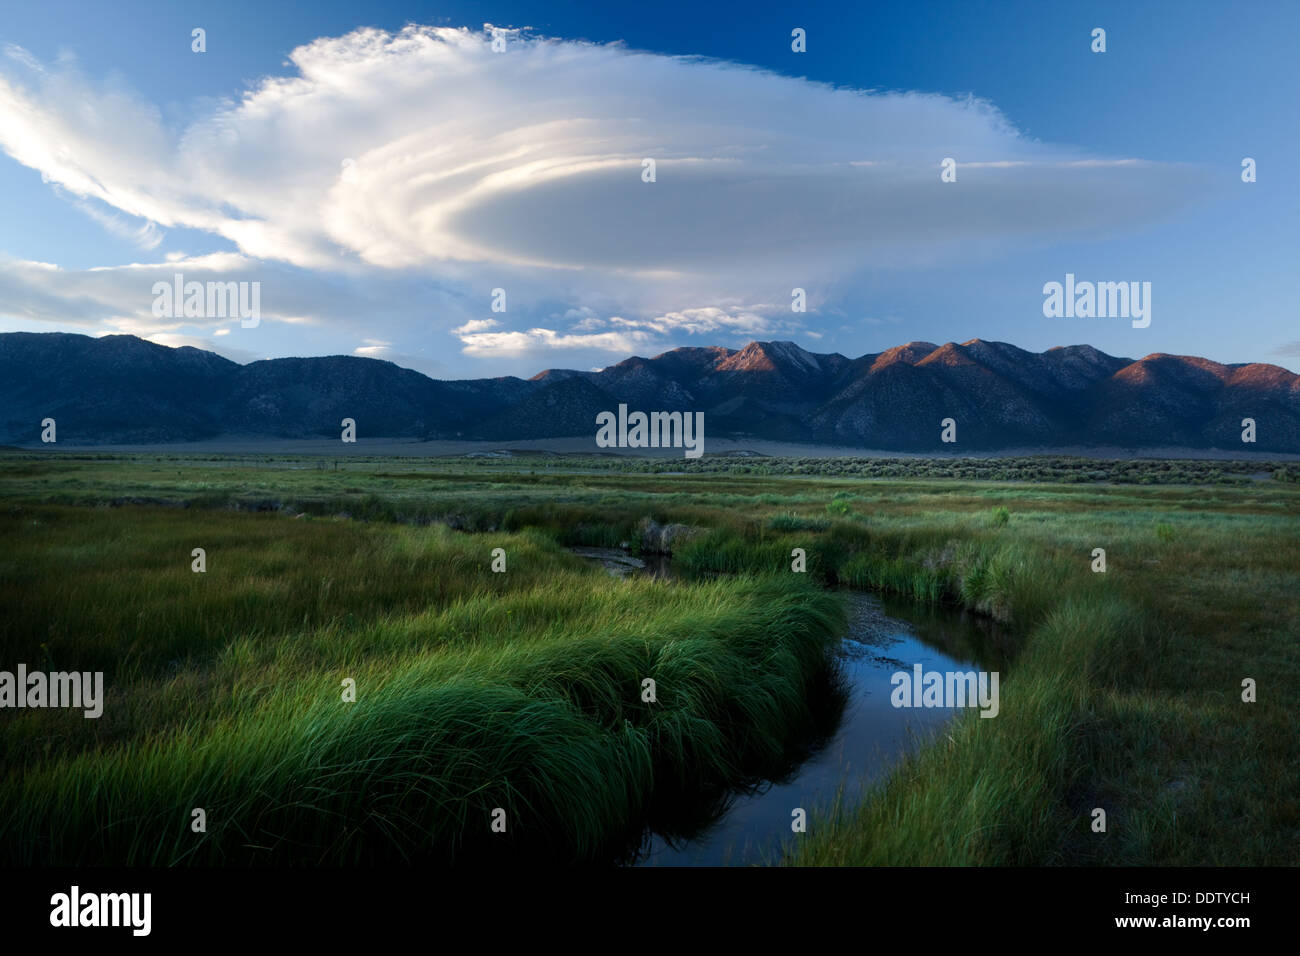 Owens River curving through grassy flatlands with dramatic white lenticular clouds, reflected in the water, and Sierra Nevada mo Stock Photo